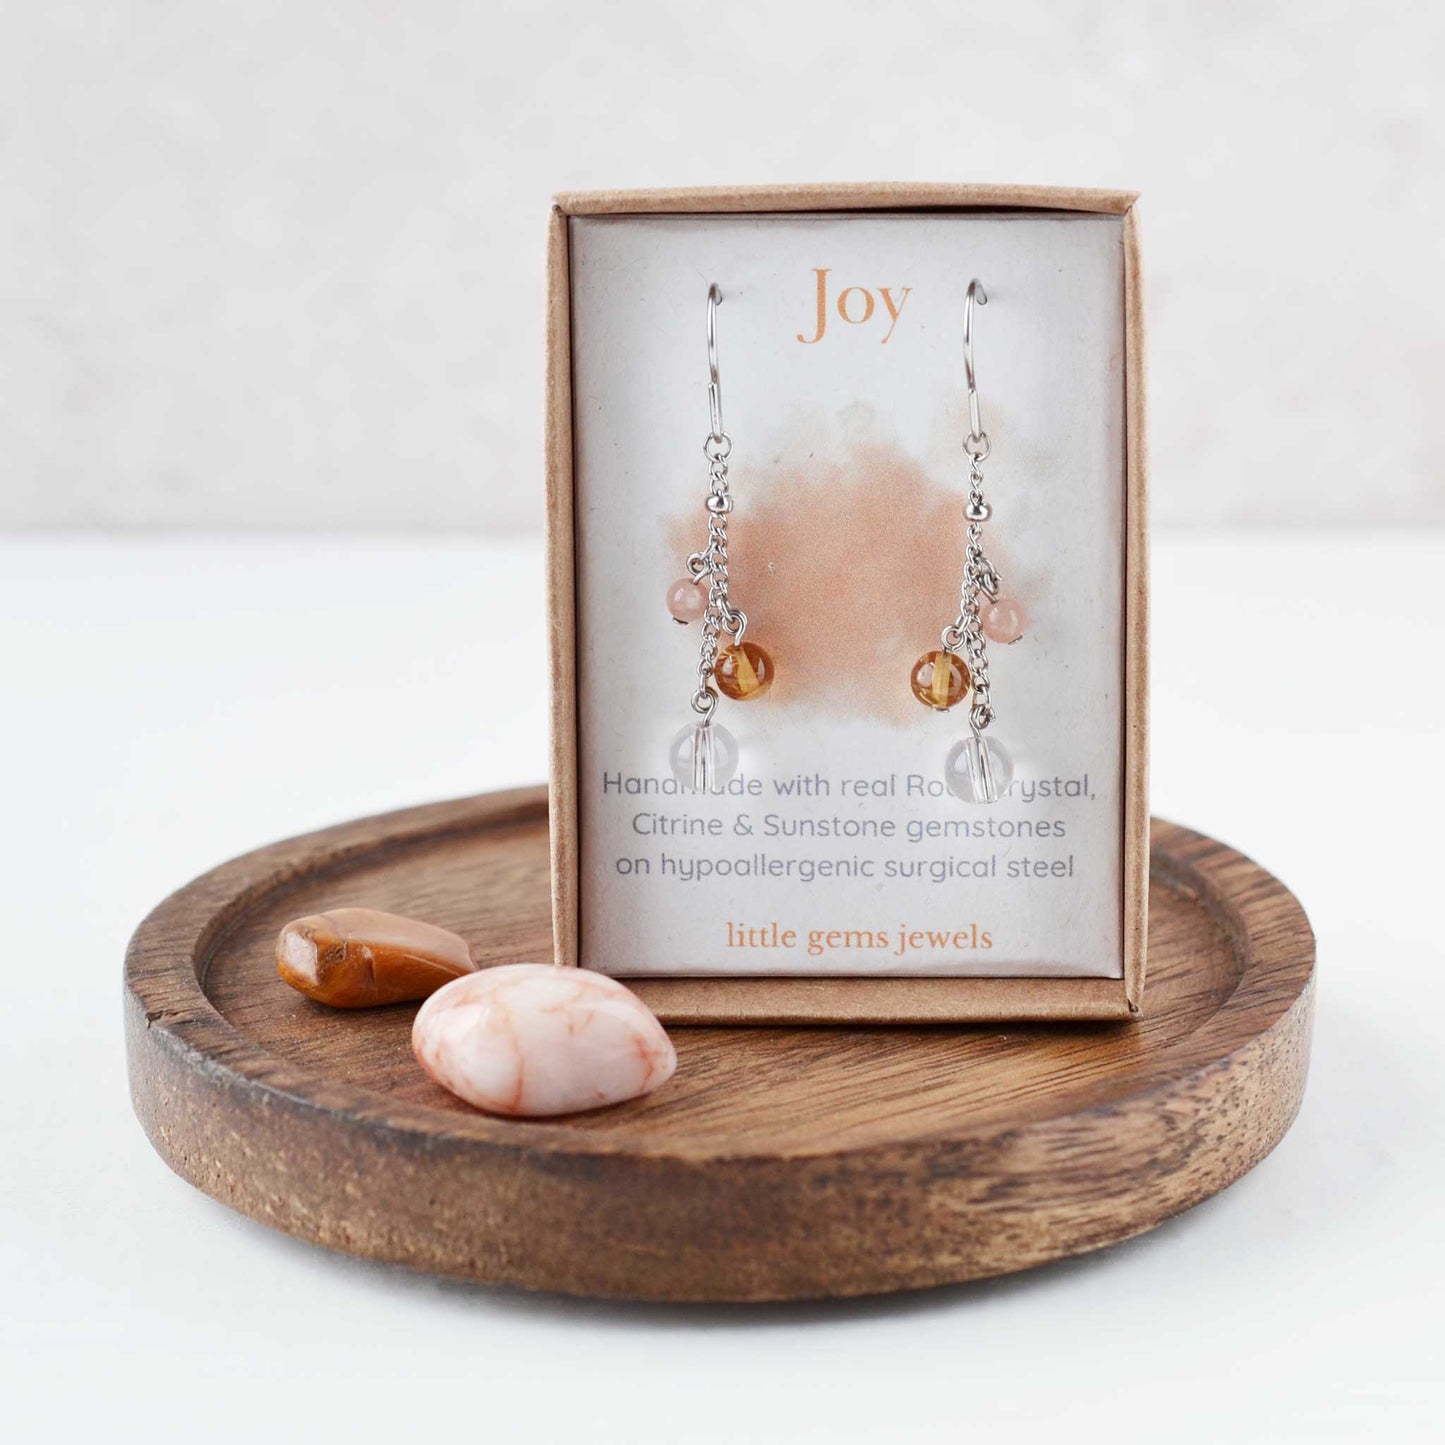 Yellow gemstone drop earrings on meaning card for Joy inside an eco friendly gift box